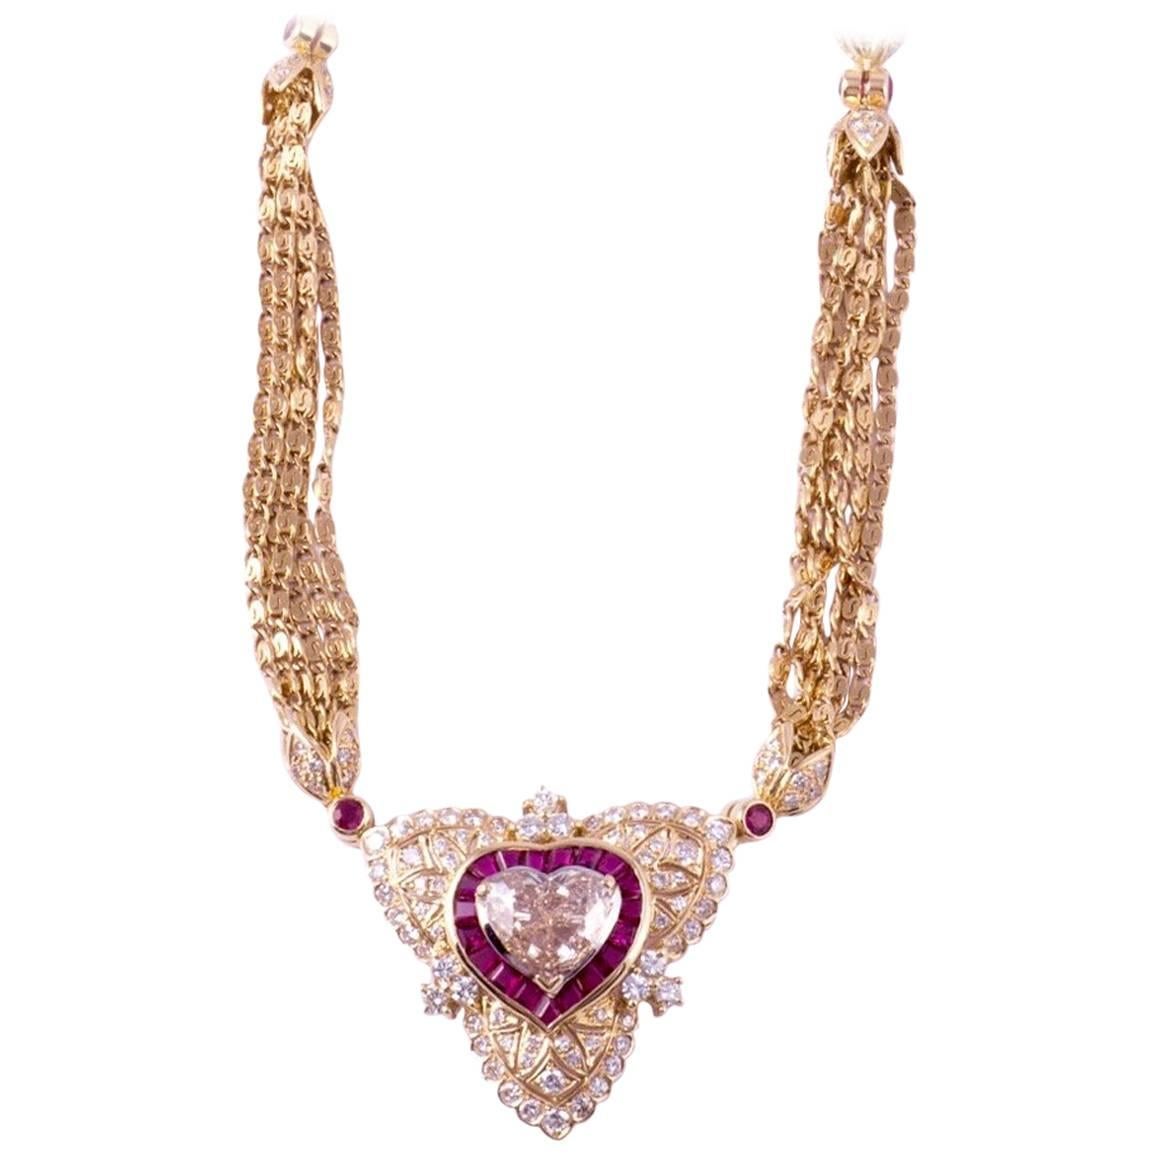 Regal Diamond Heart Necklace with Ruby and Diamonds in 18 Karat Gold